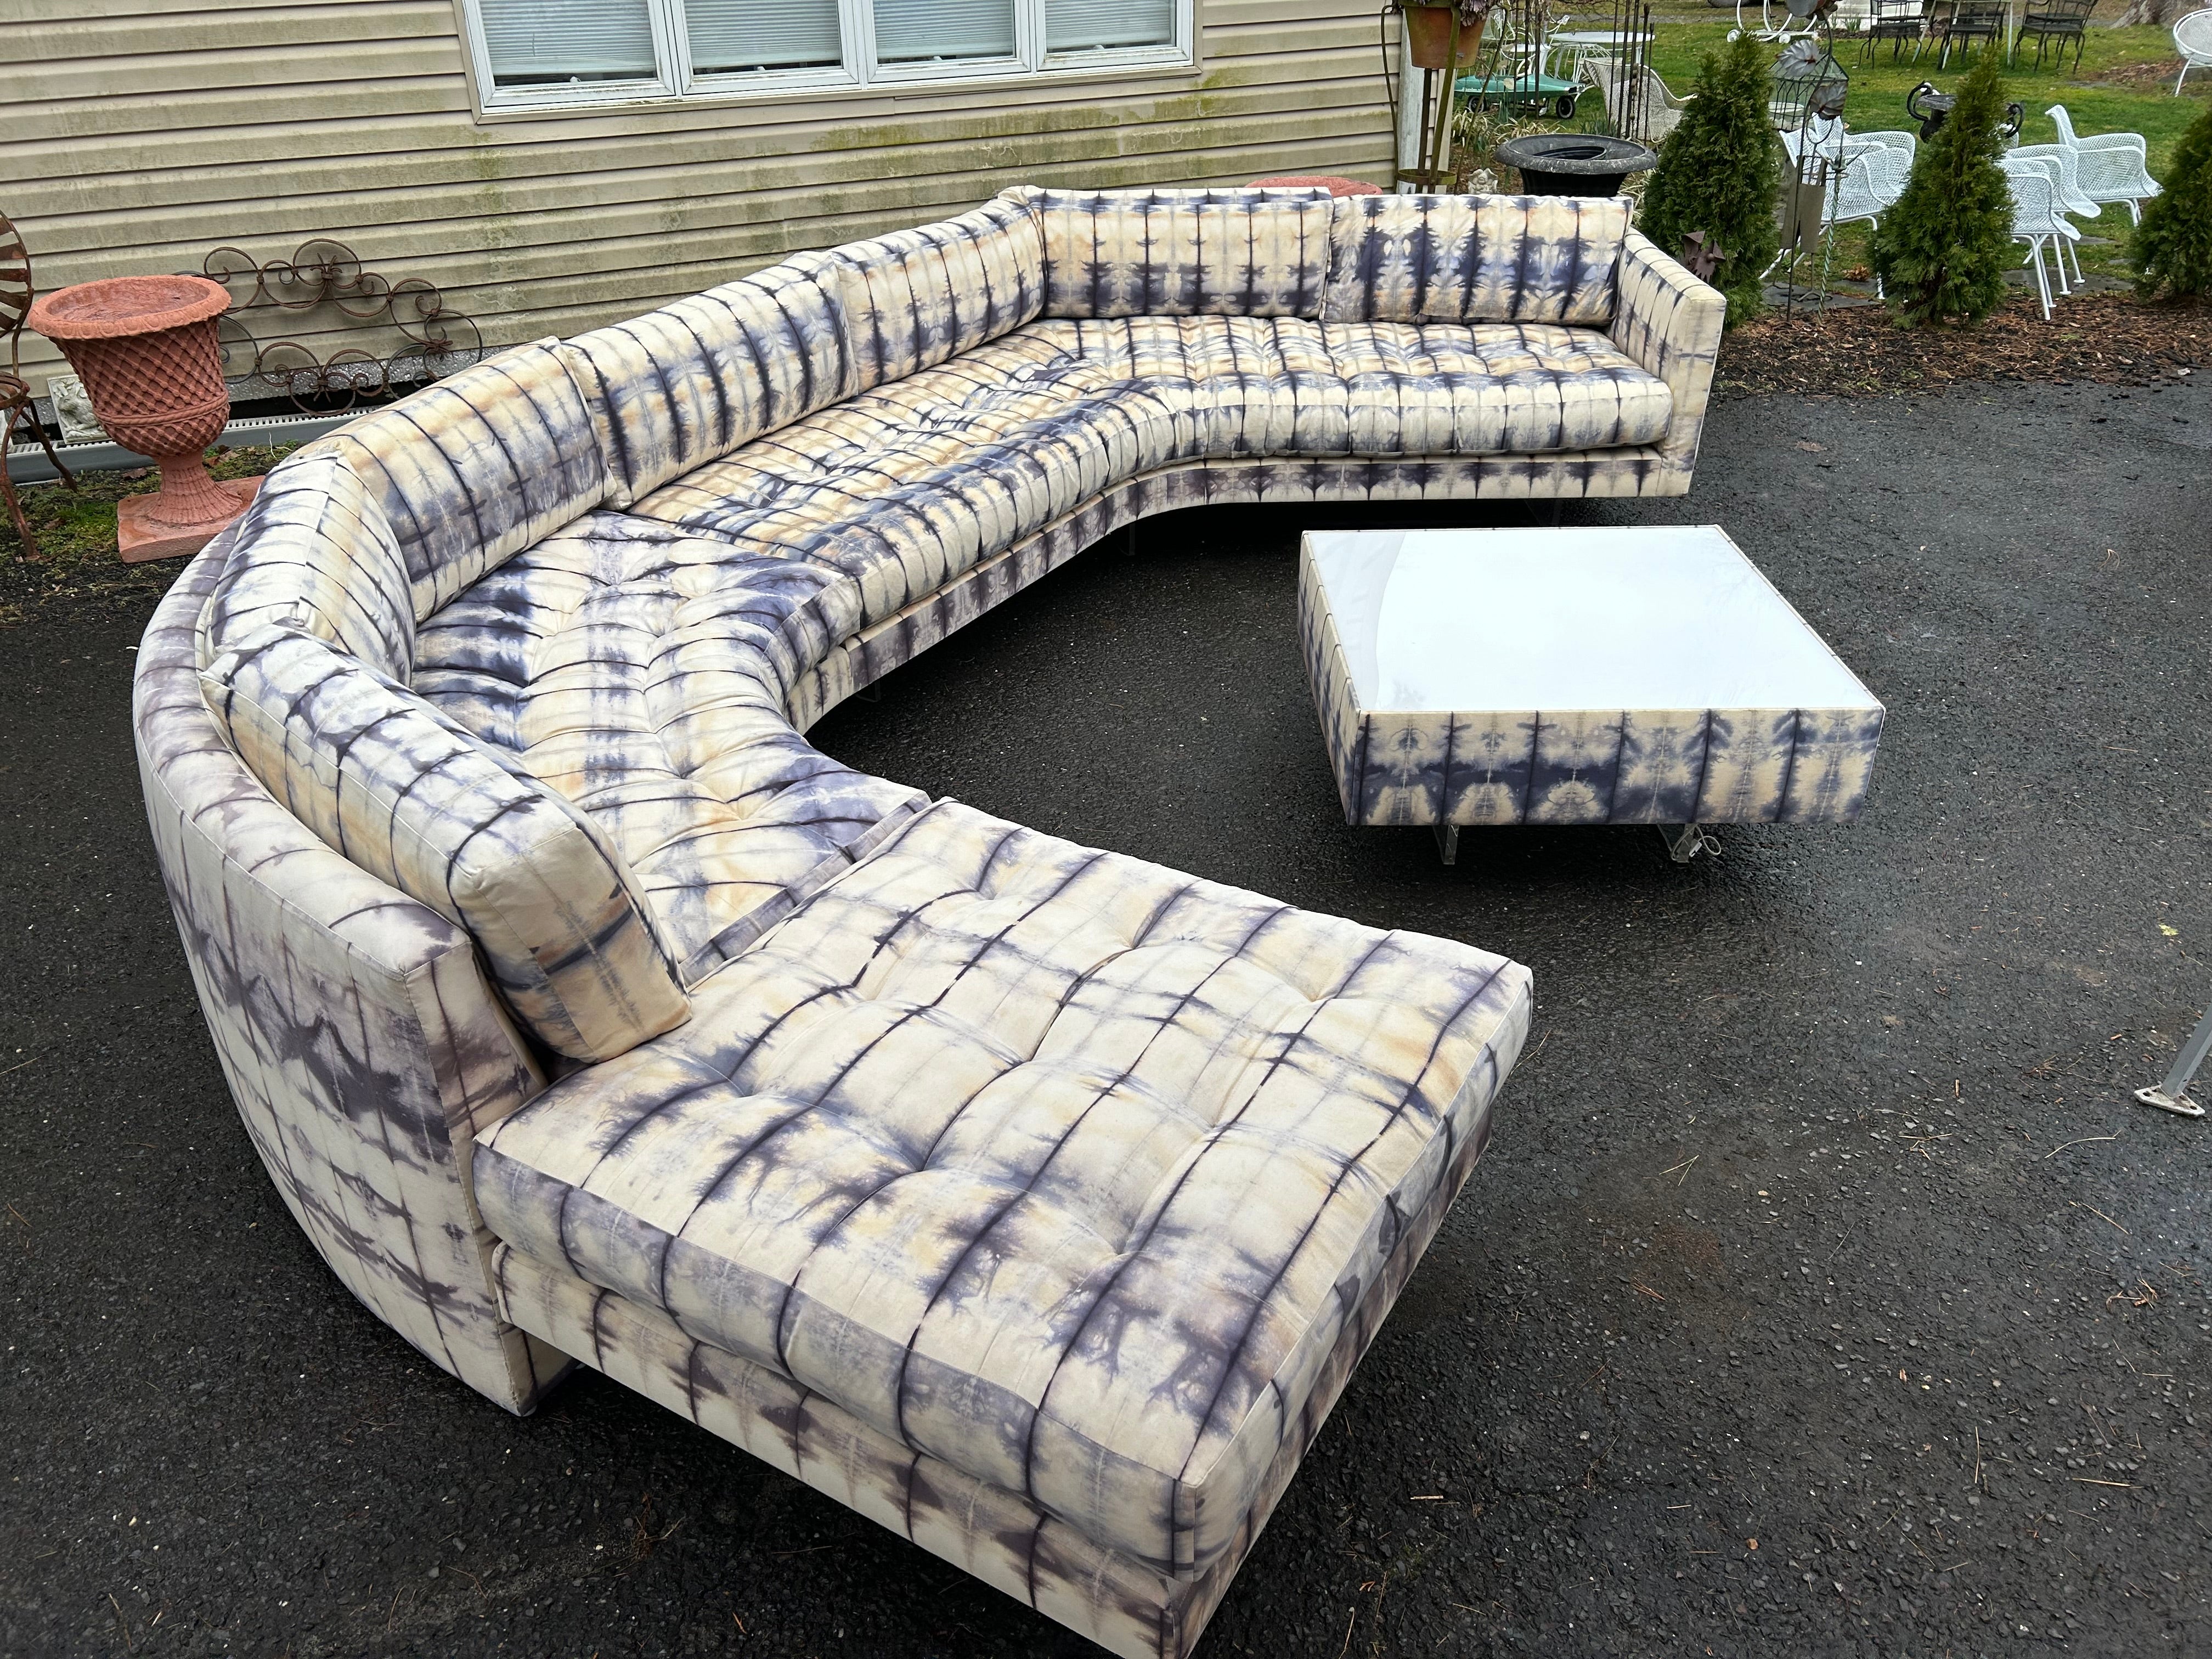 Large 3 piece sectional sofa with matching illuminated coffee table by Vladimir Kagan, Omnibus Collection, American 1975 (signed with original labels). This amazing sofa has been recently upholstered in an sensational nautical tie-dyed canvas